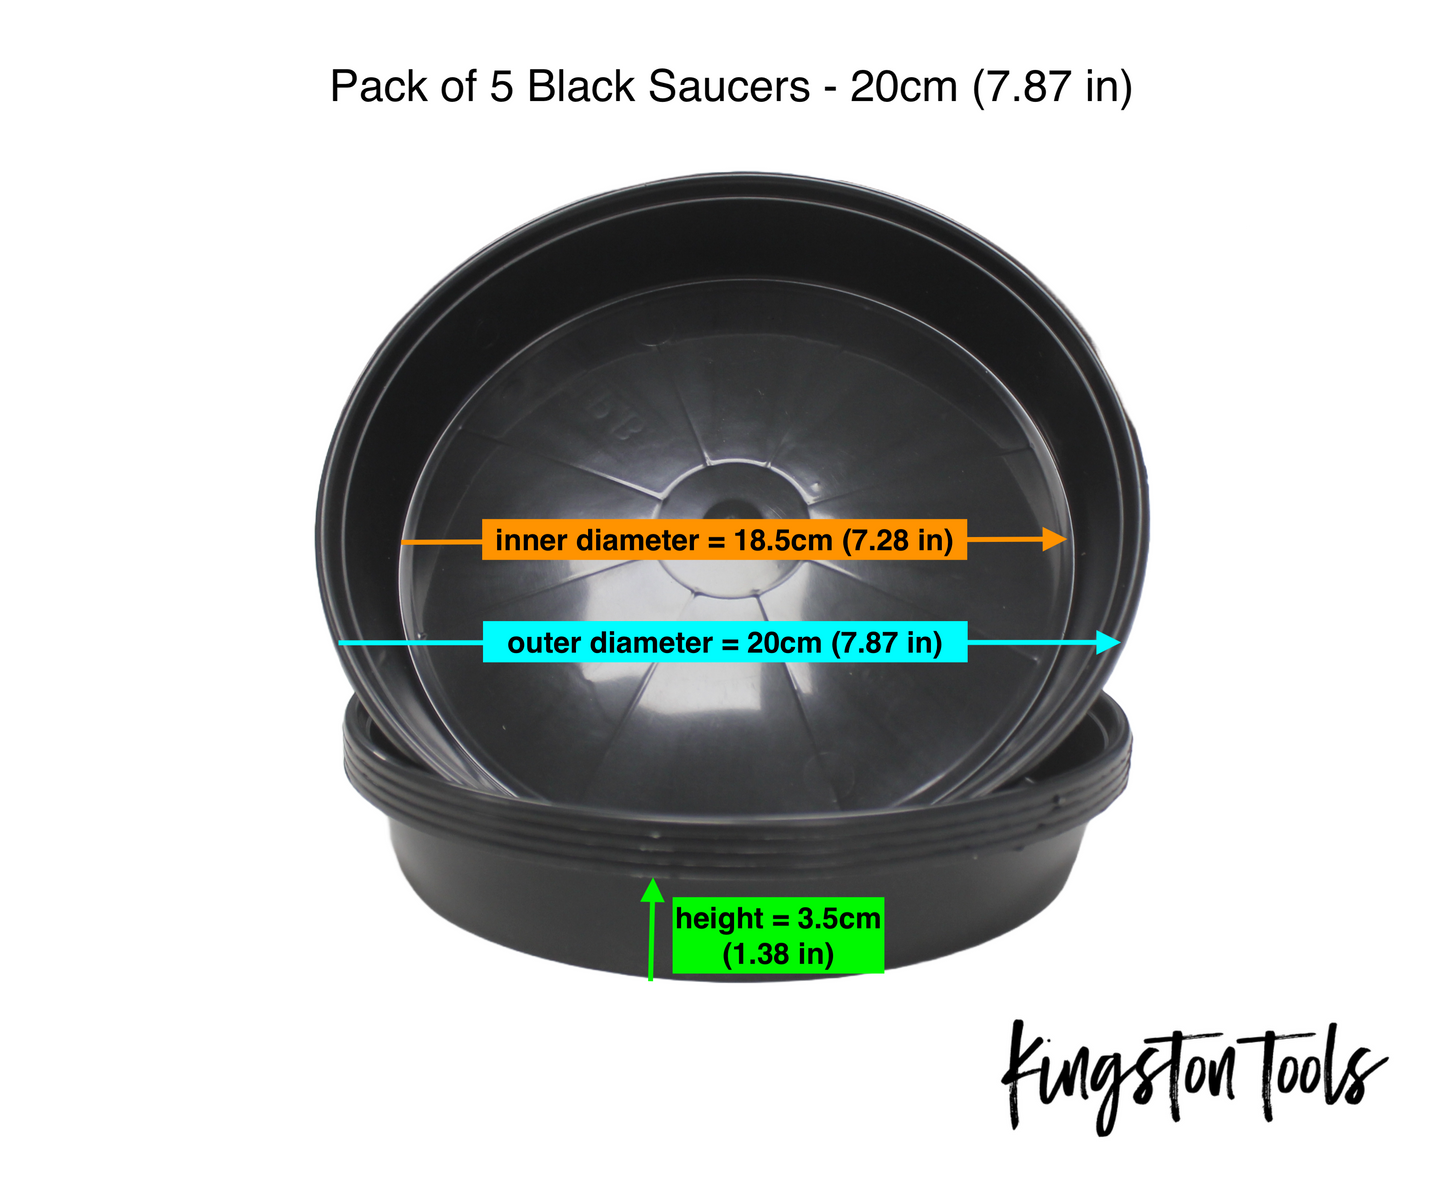 Kingston Tools Pack of 5 Black & Terracotta Plant Pot Saucers Made from Recycled Plastic Strong and Sturdy Drip Tray 6 sizes Available: 18cm, 20cm, 25cm, 30cm, 40cm, 50cm